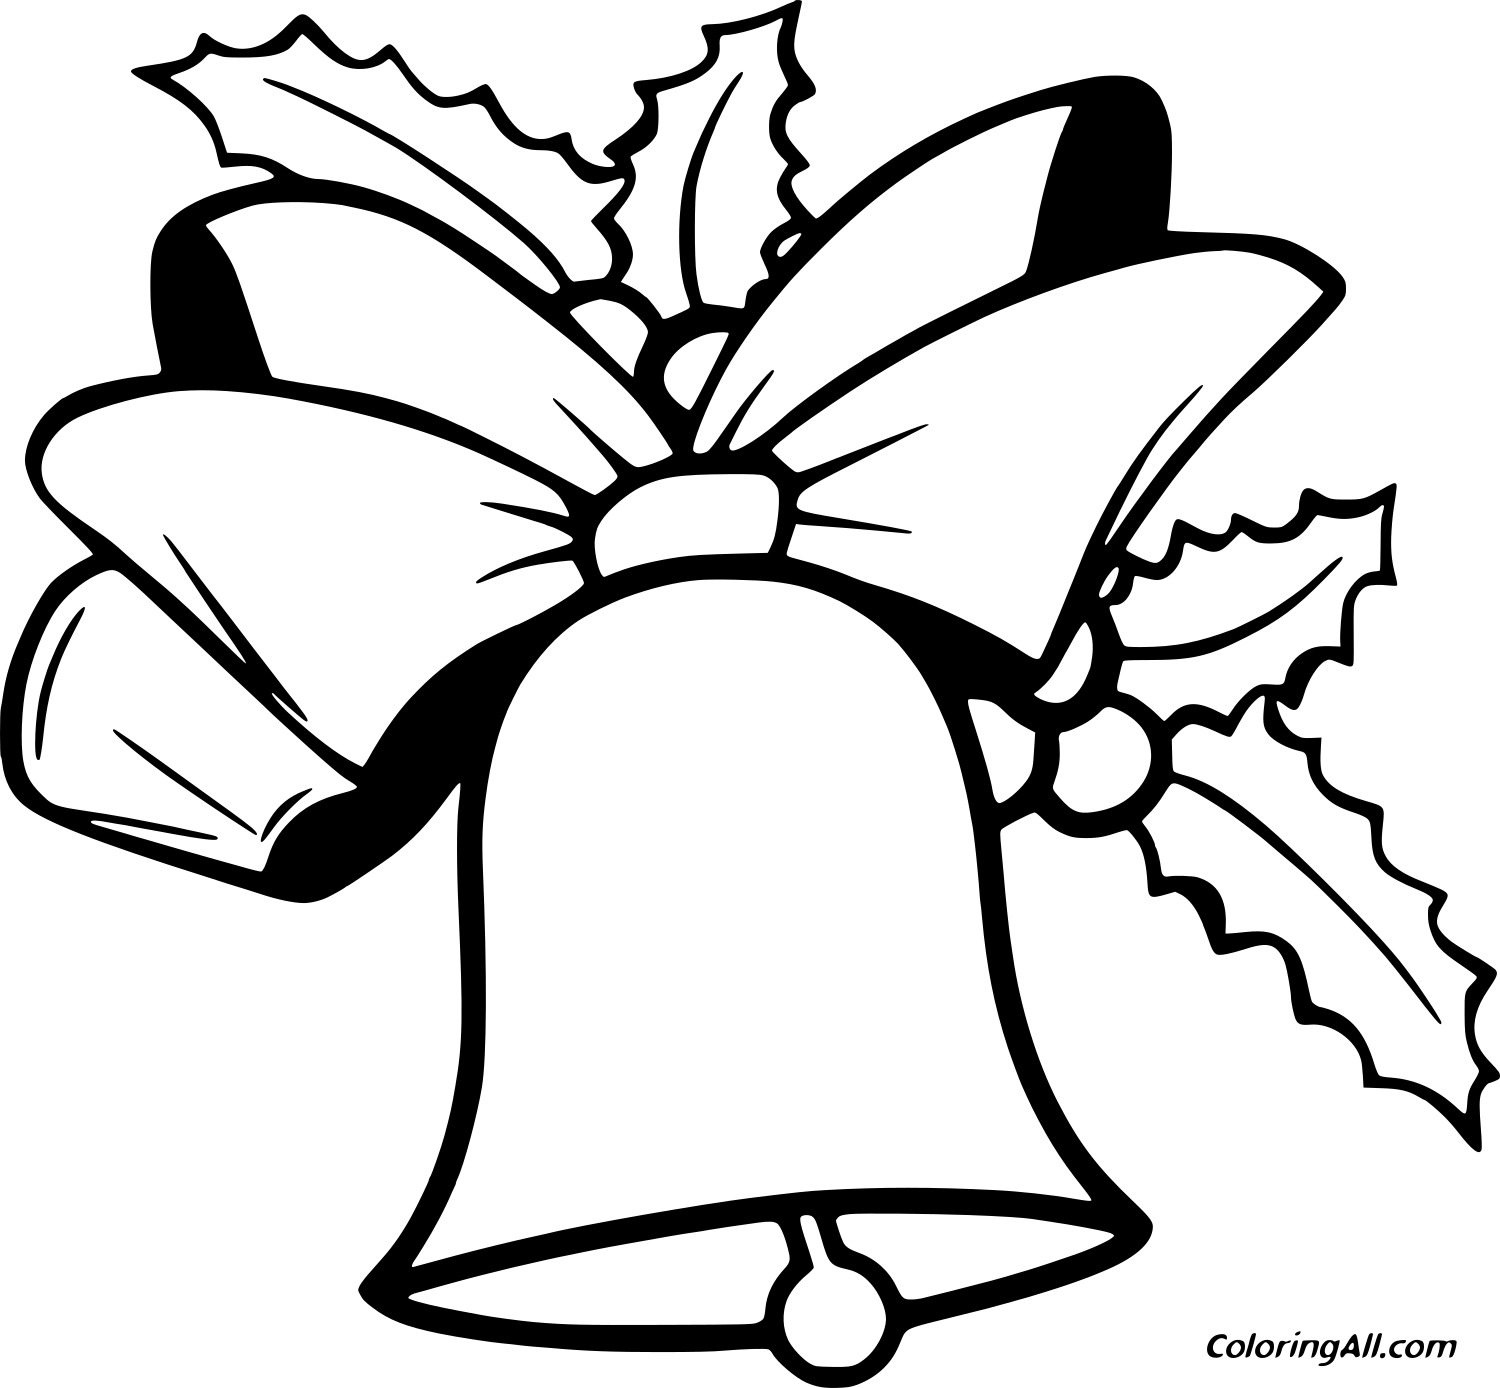 Bell With Bowknots Image For Kids Coloring Page